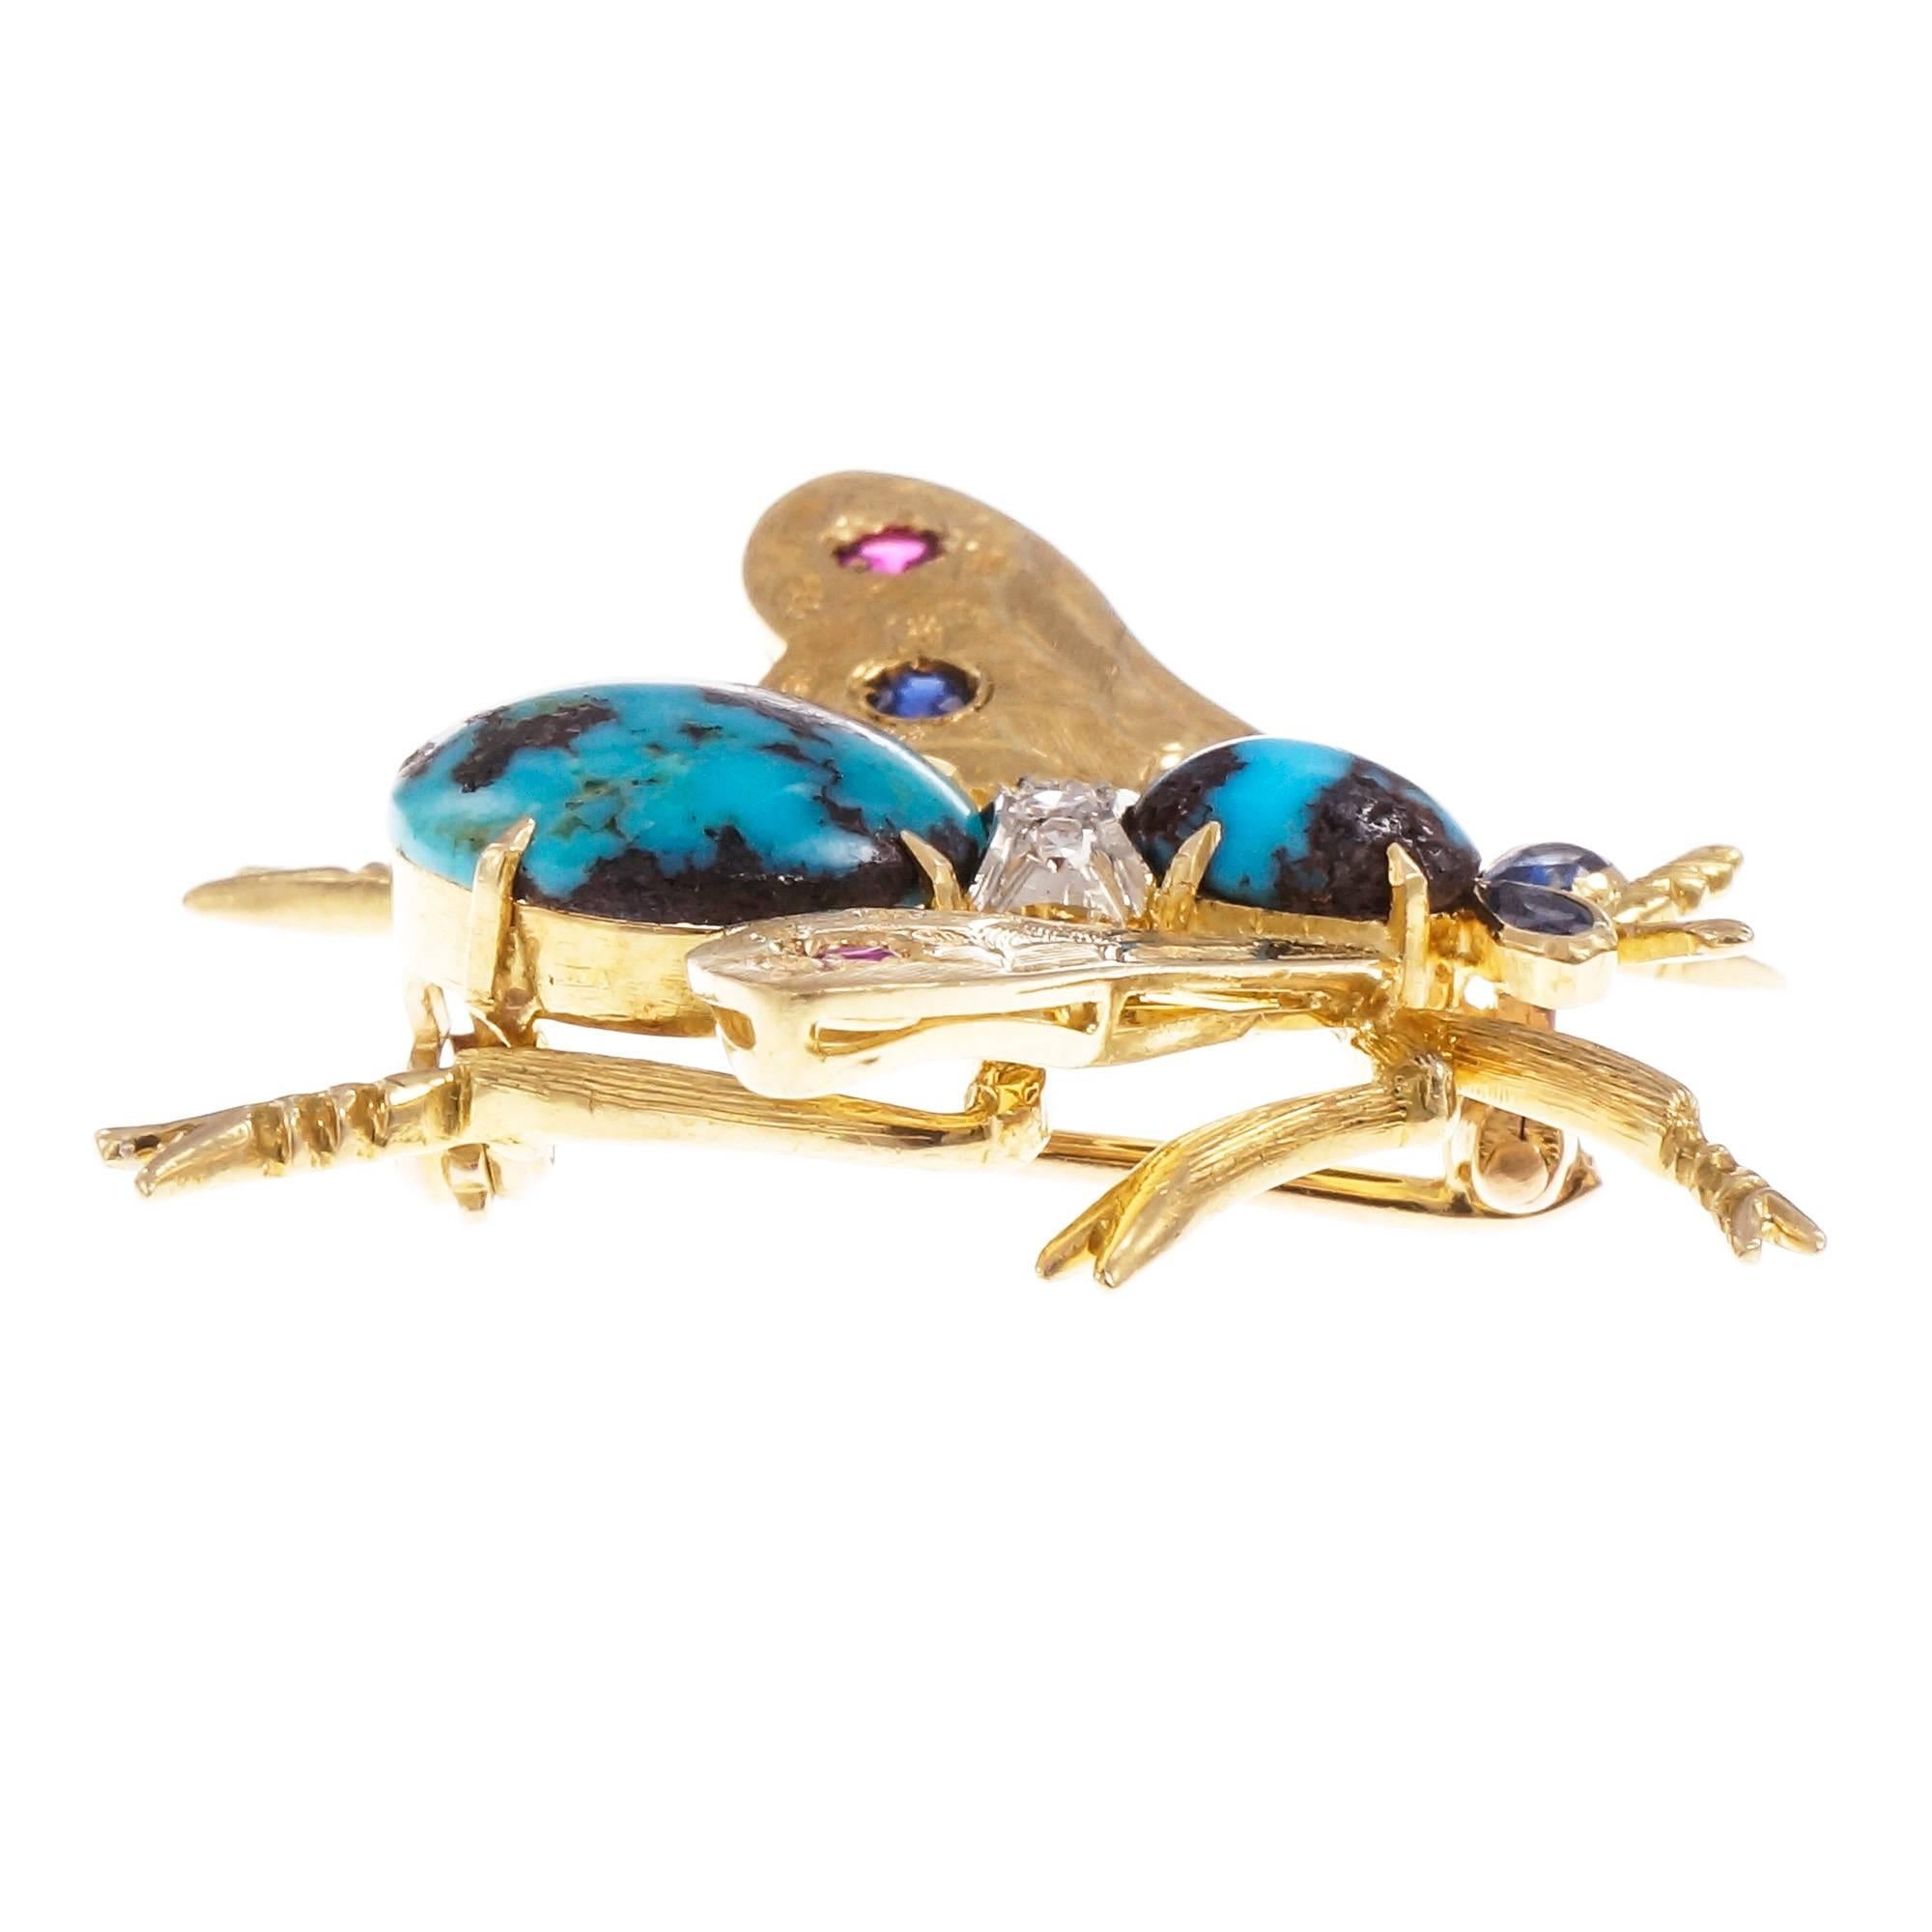 Vintage 3-D 1950 18k yellow gold bee pin with all natural untreated gemstones. Turquoise matrix, Sapphire eyes. Diamond, Ruby and Sapphire accents.

1 round cabochon Turquoise, 12 x 12 x 3.3mm
2 pear Sapphires, approx. total weight .06cts
1 oval